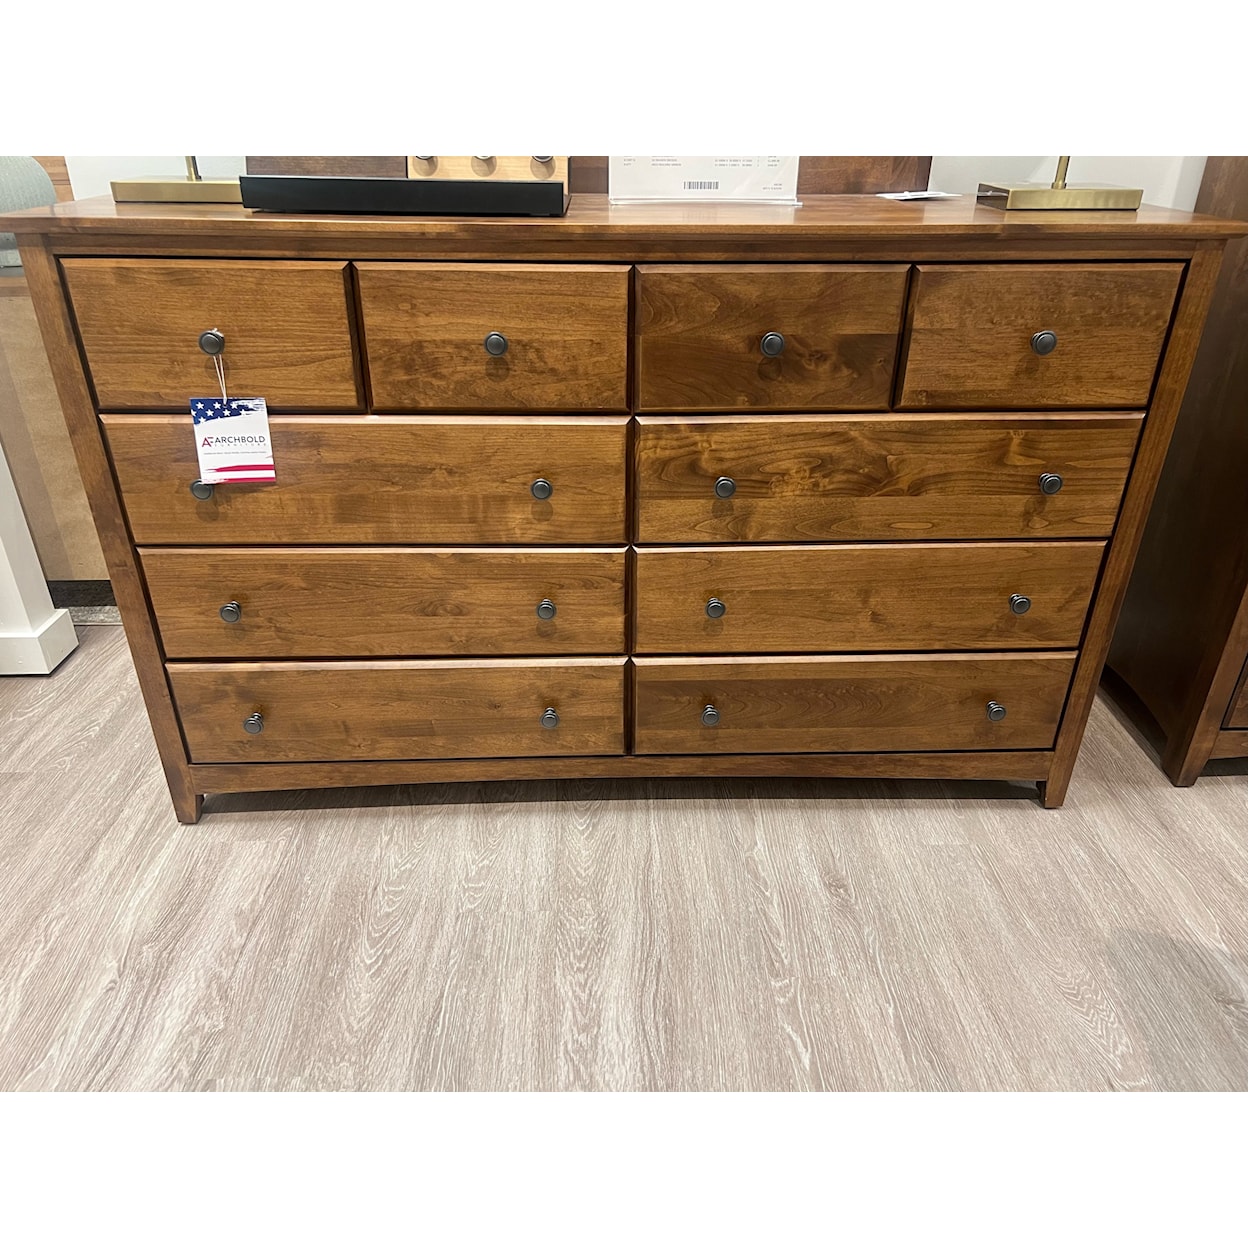 Archbold Furniture Chest Bed Bedroom Groups